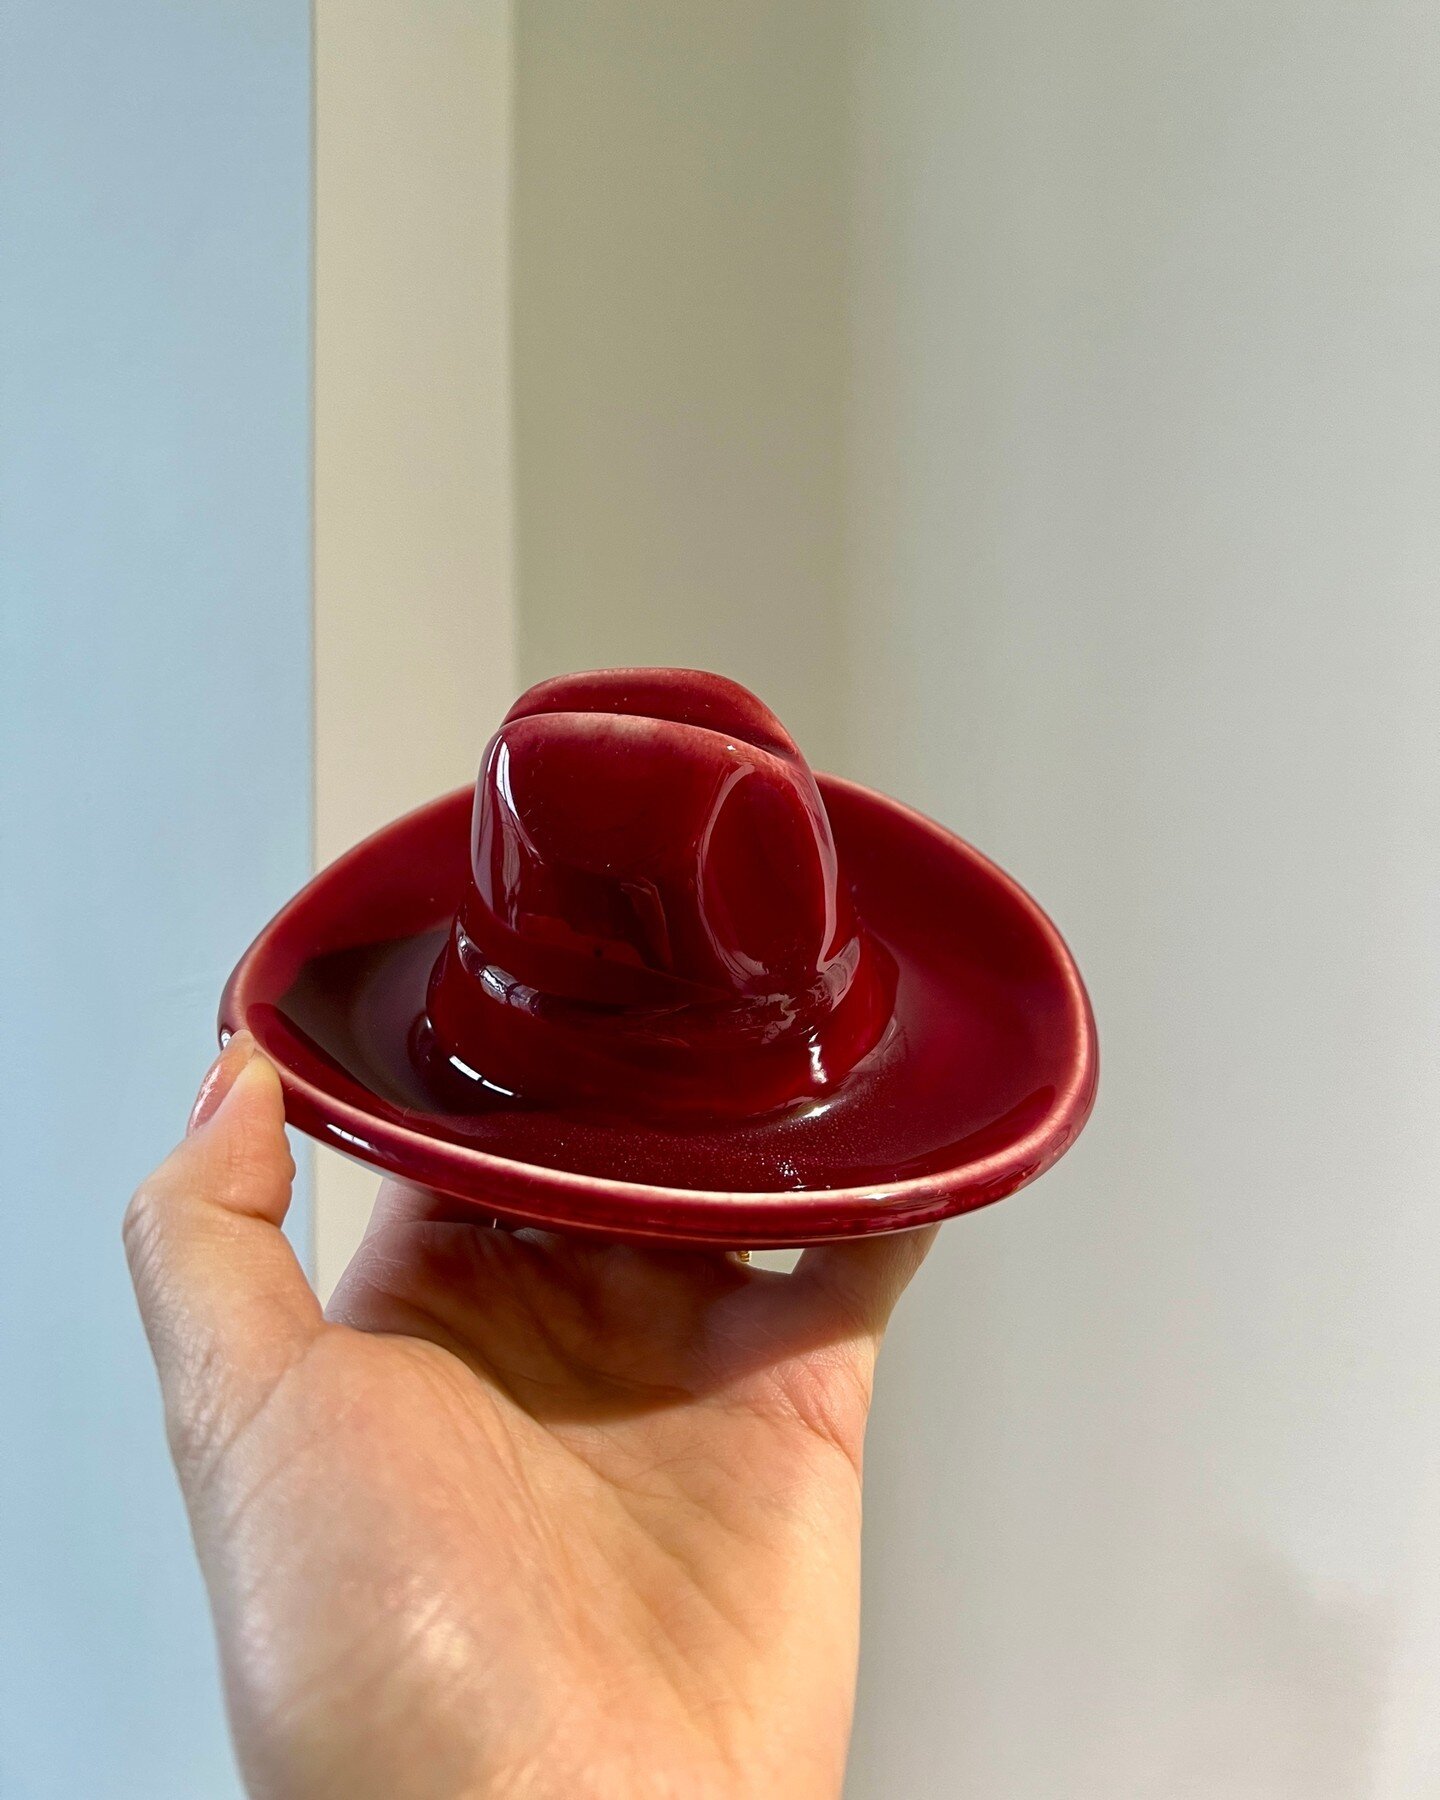 Shiny burgundy cowboy hat ashtray 🤠&hearts;️✨ sourced for our dear friend, @jacobometzger